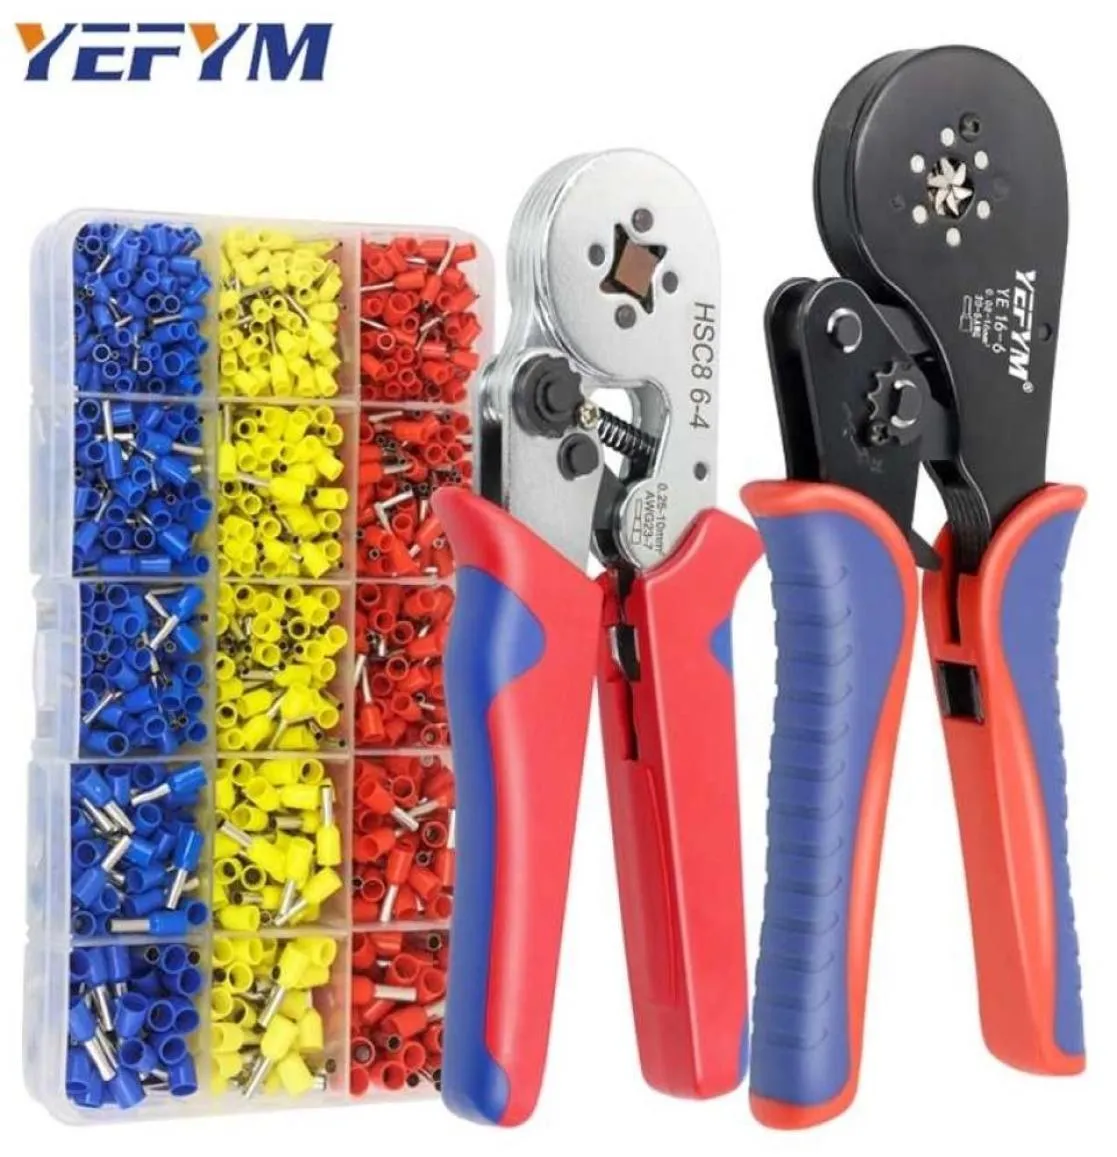 Tubular Terminal Crimping Pliers HSC8 6466166max 00816mmwire mini Ferrule crimper tools YEFYM Household electrical kit 22011687757